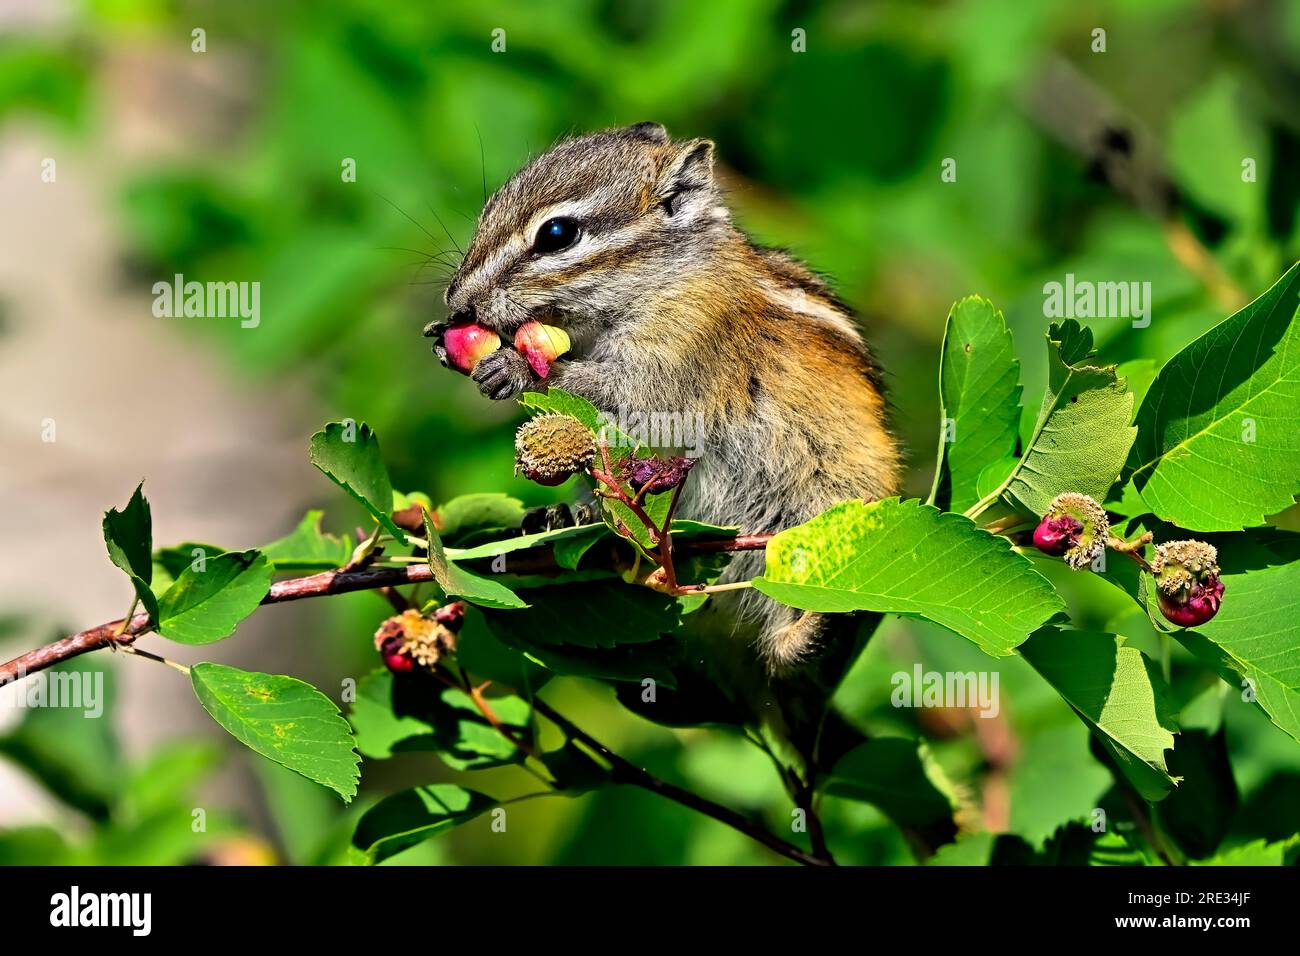 A least chipmunk, 'Eutamias minimus', foraging on a tree branch for some tasty red berries. Stock Photo